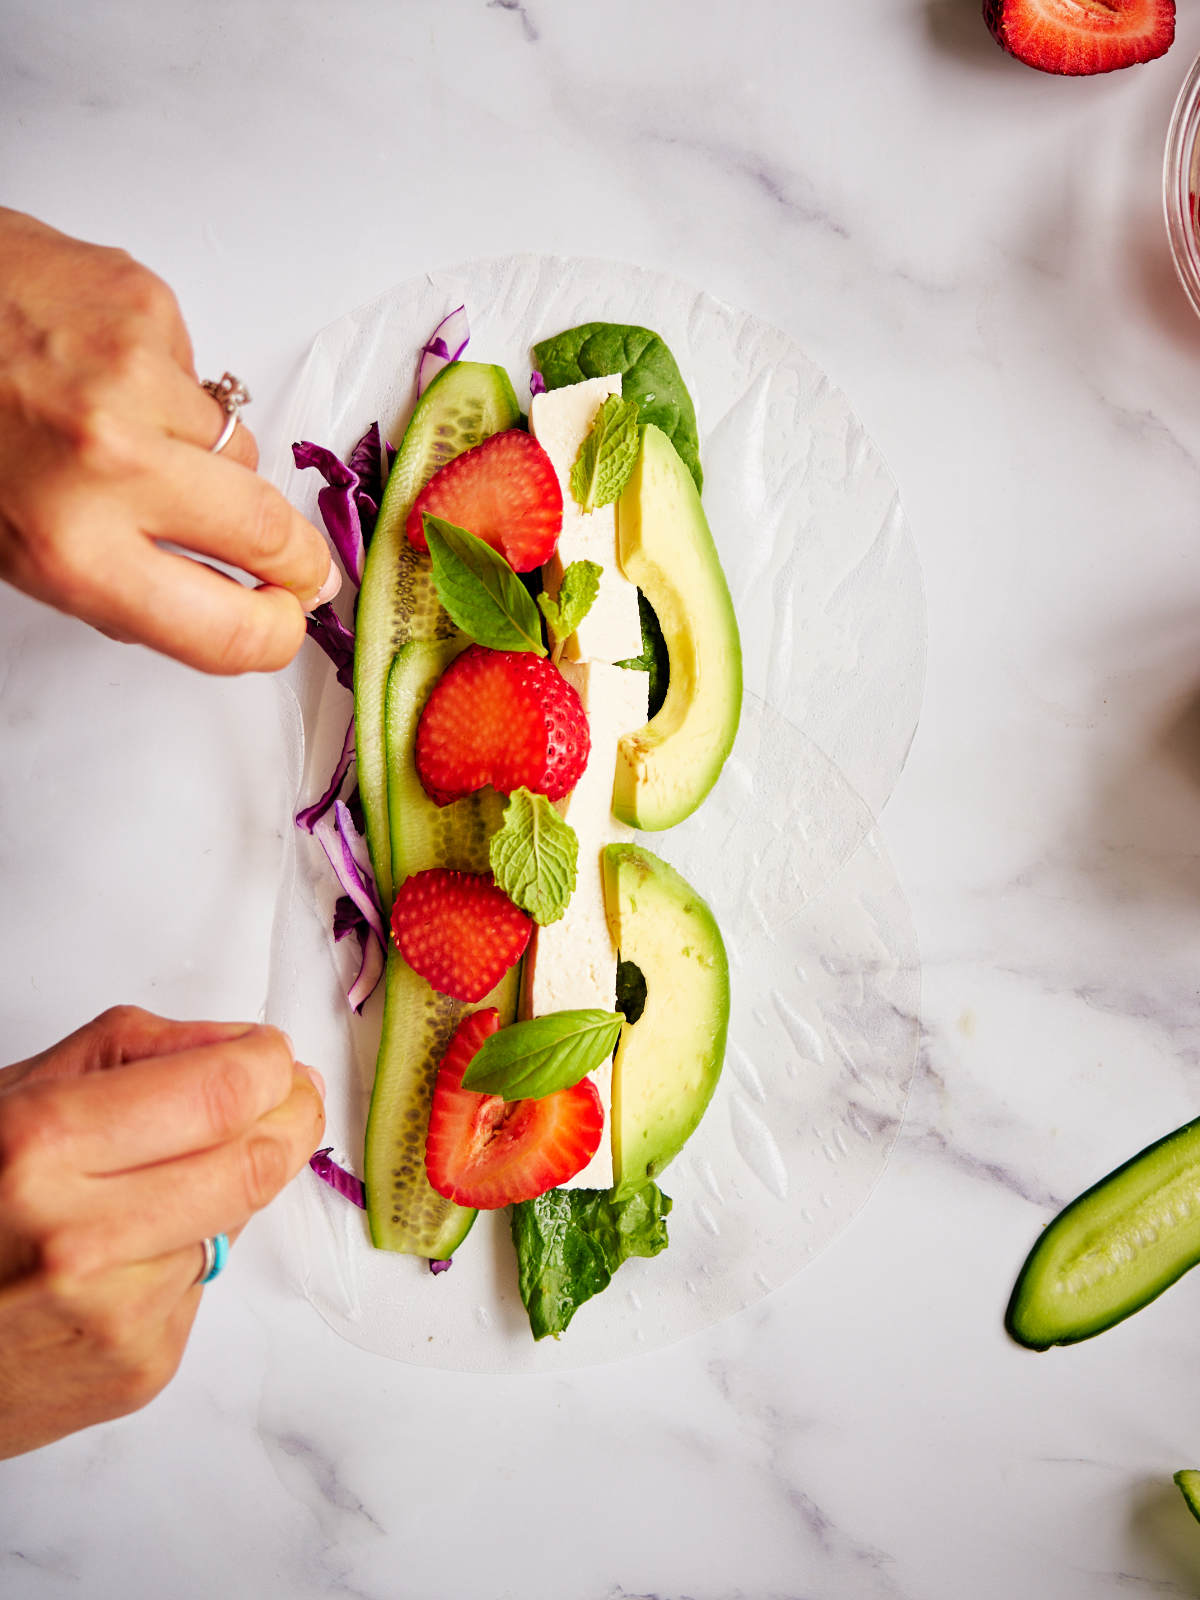 Two hands rolling a salad roll filled with avocado and strawberries.